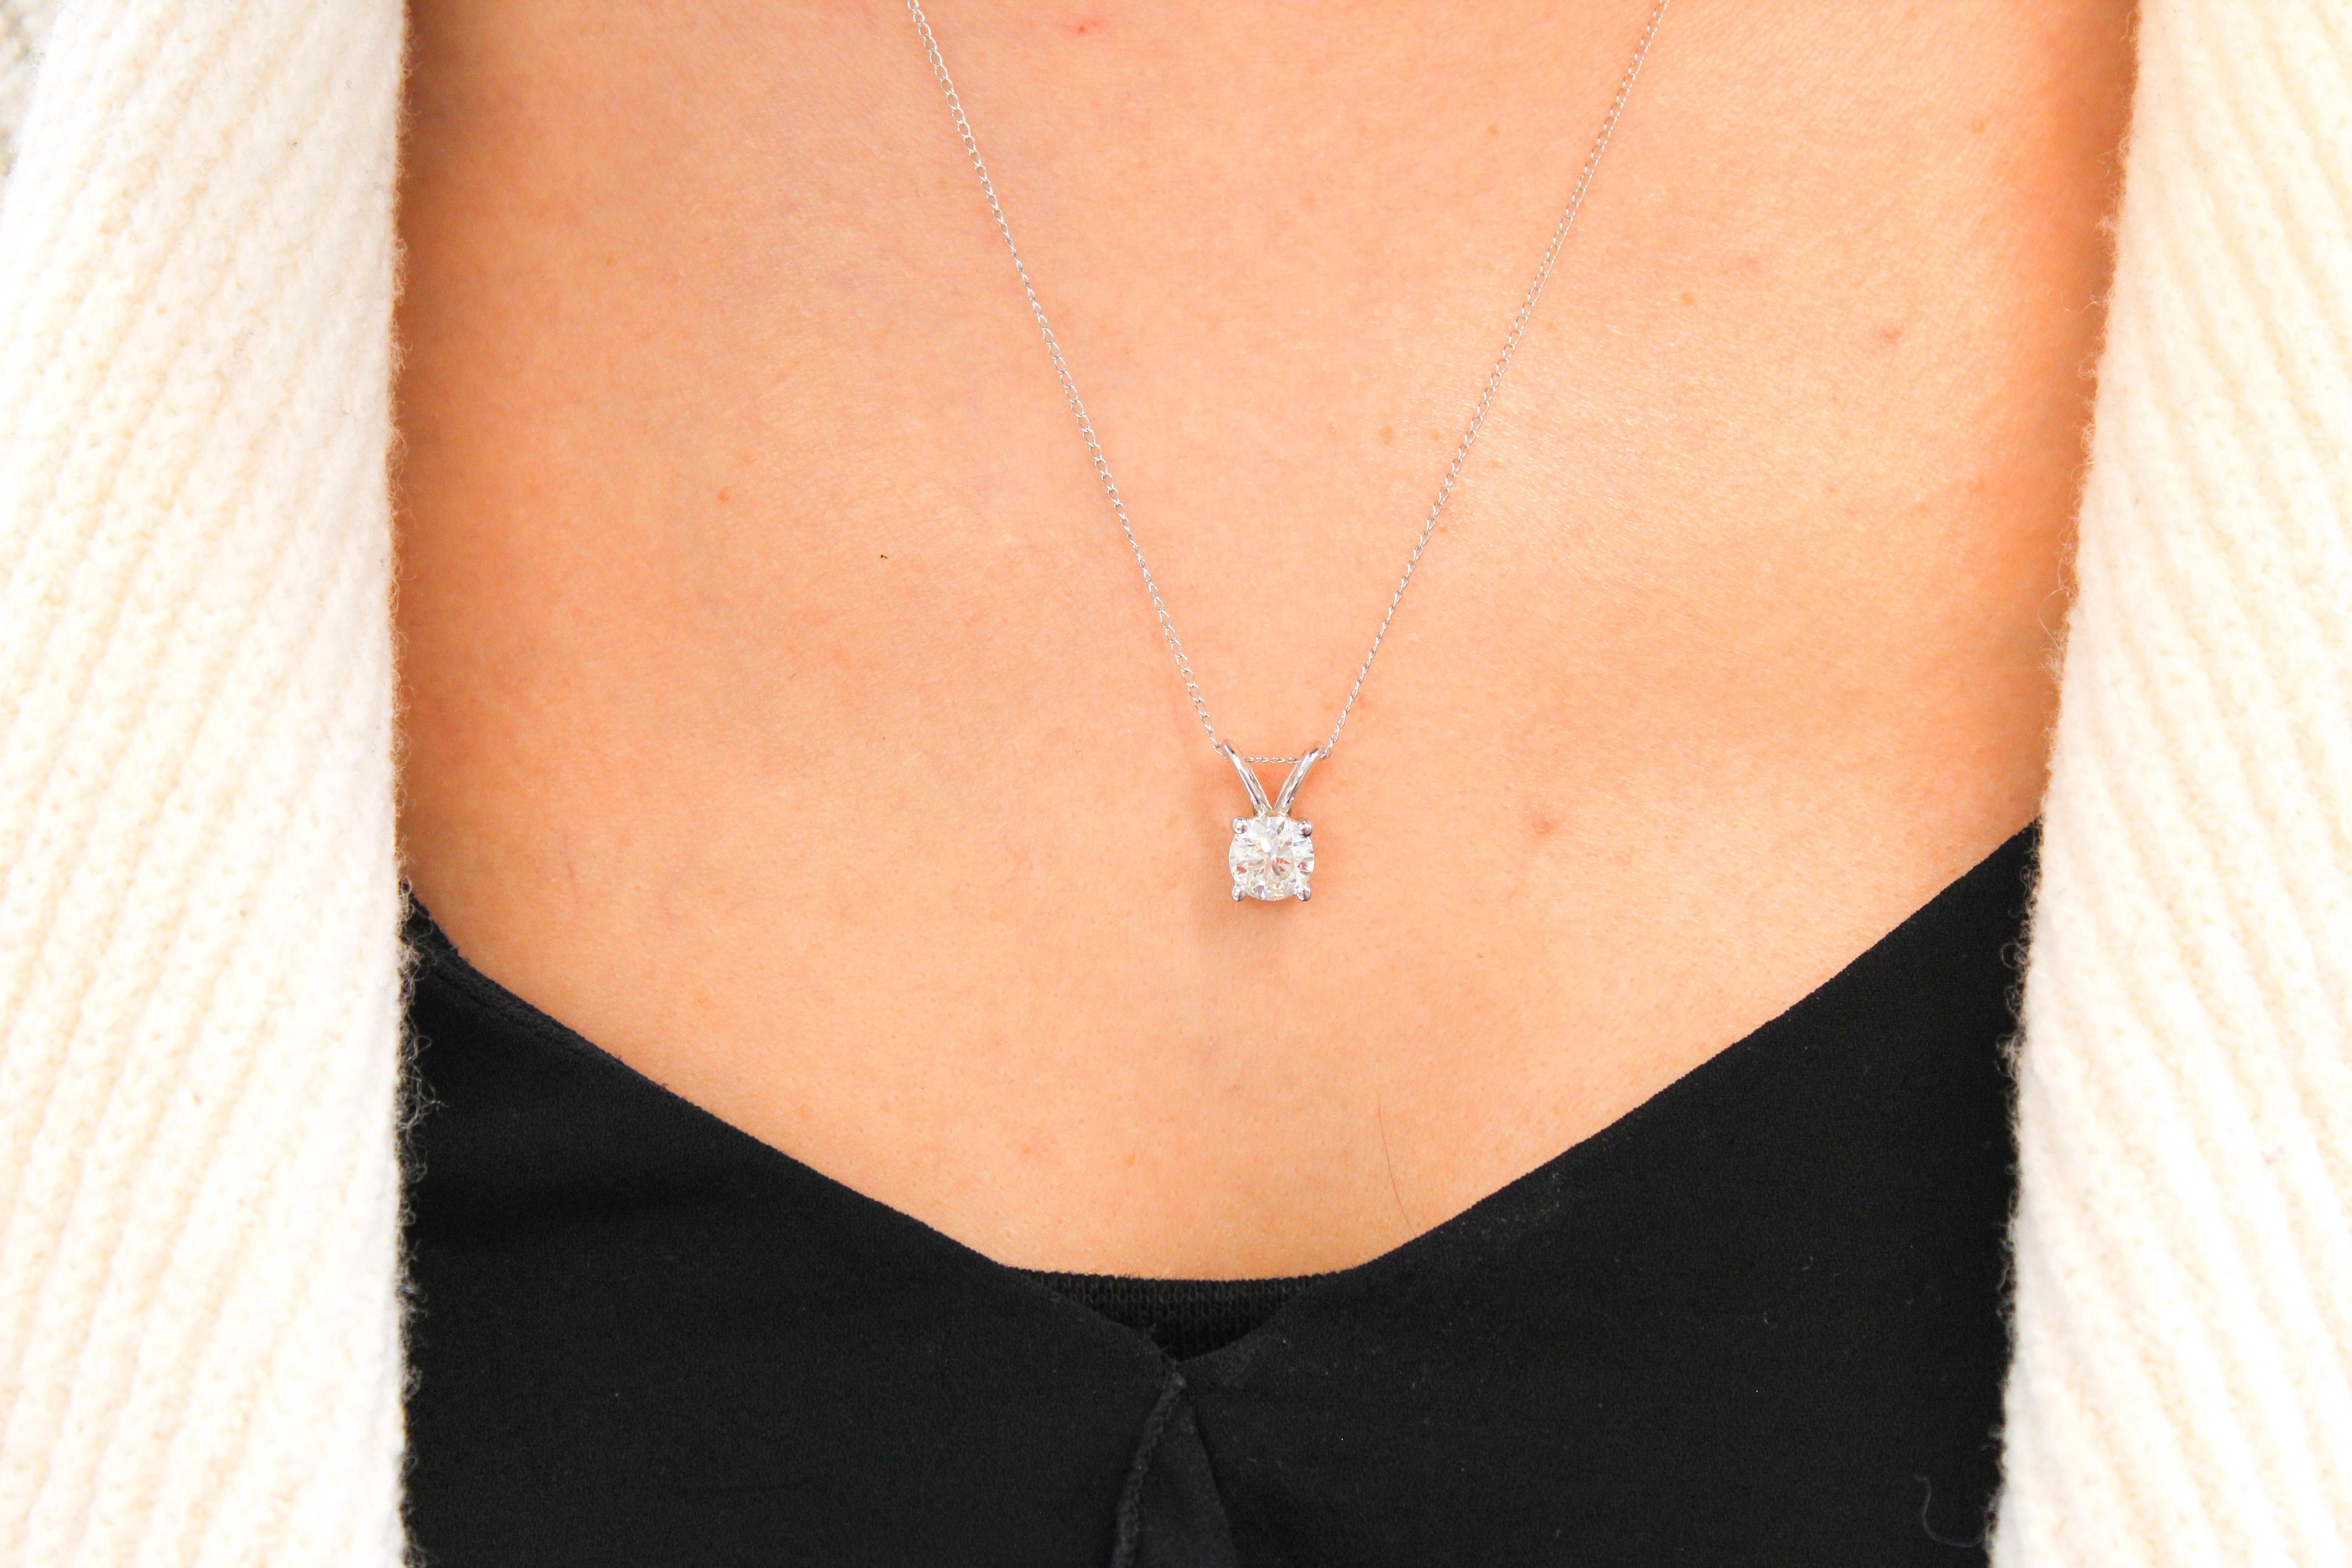 This impressive diamond solitaire pendant is finely crafted in brightly polished 14 karat rose gold and features a round shaped 1.00 carat diamond that has I1 clarity, gracefully prong set on a shiny split bail. Ideal as an anniversary or birthday